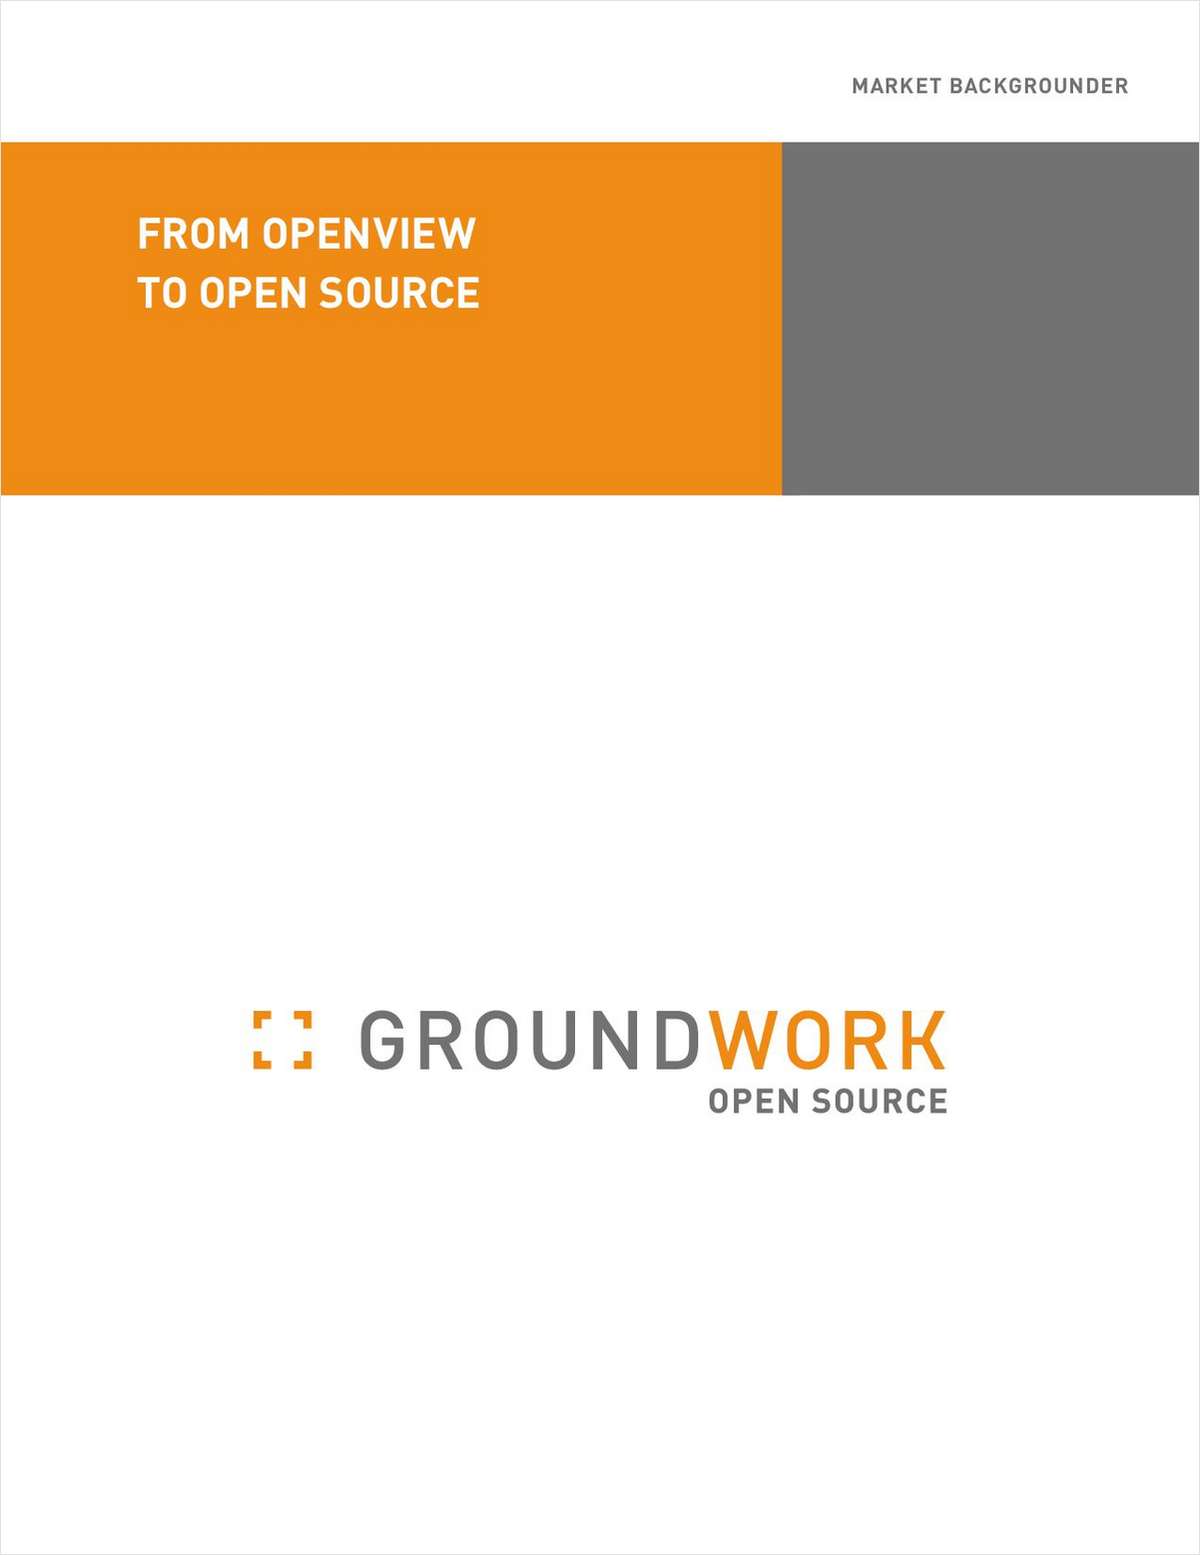 From OpenView to Open Source